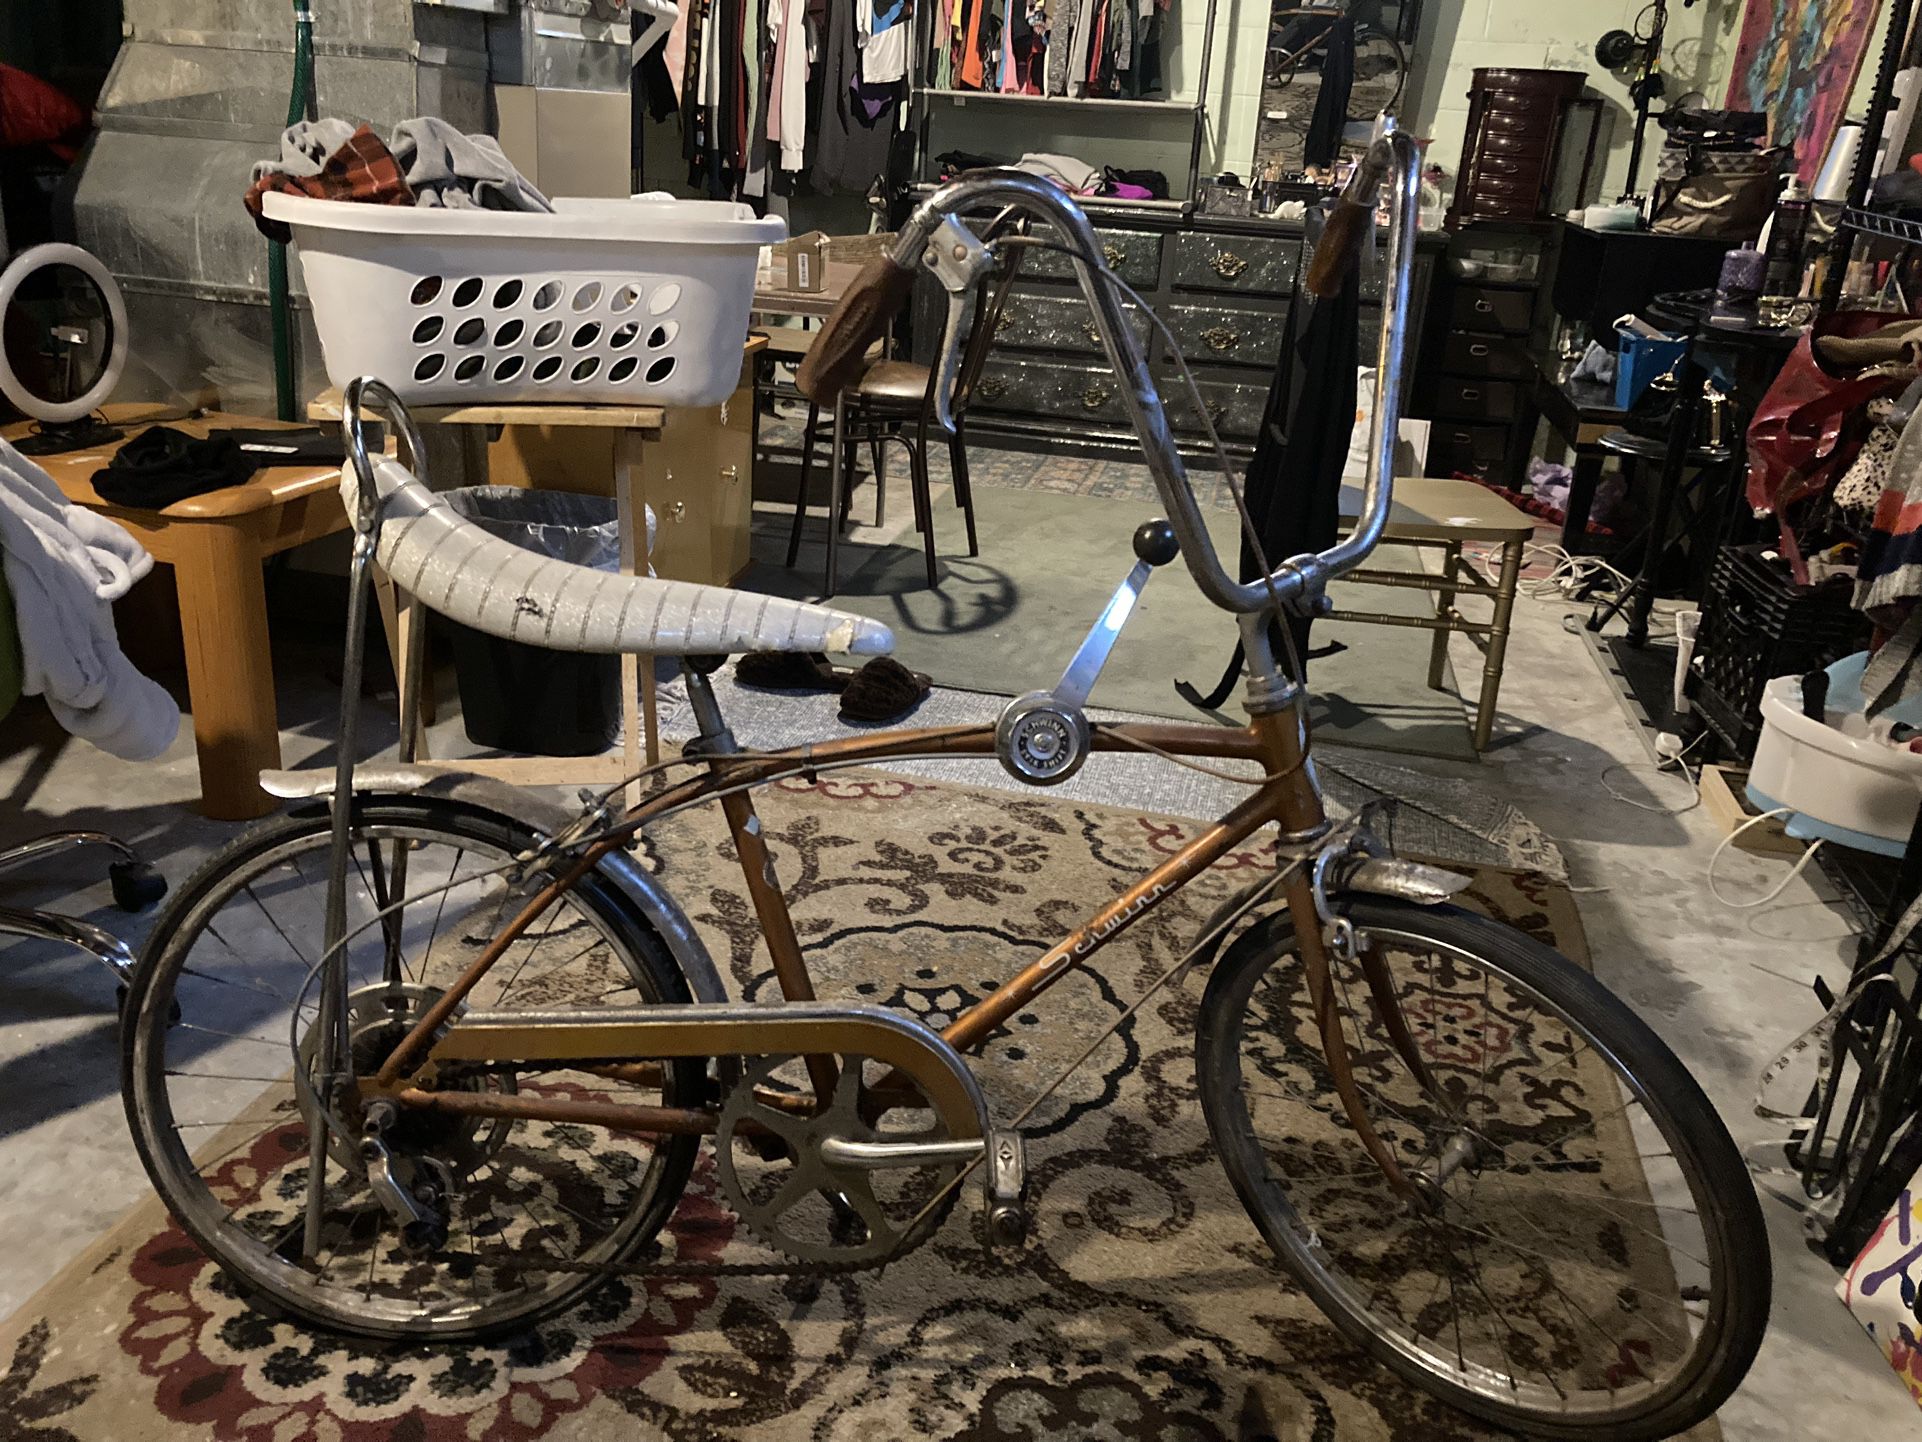 1969 Shwinn, Needs A Little Work But Is An Antique Bicycle. If Interested Message Me For Details.  